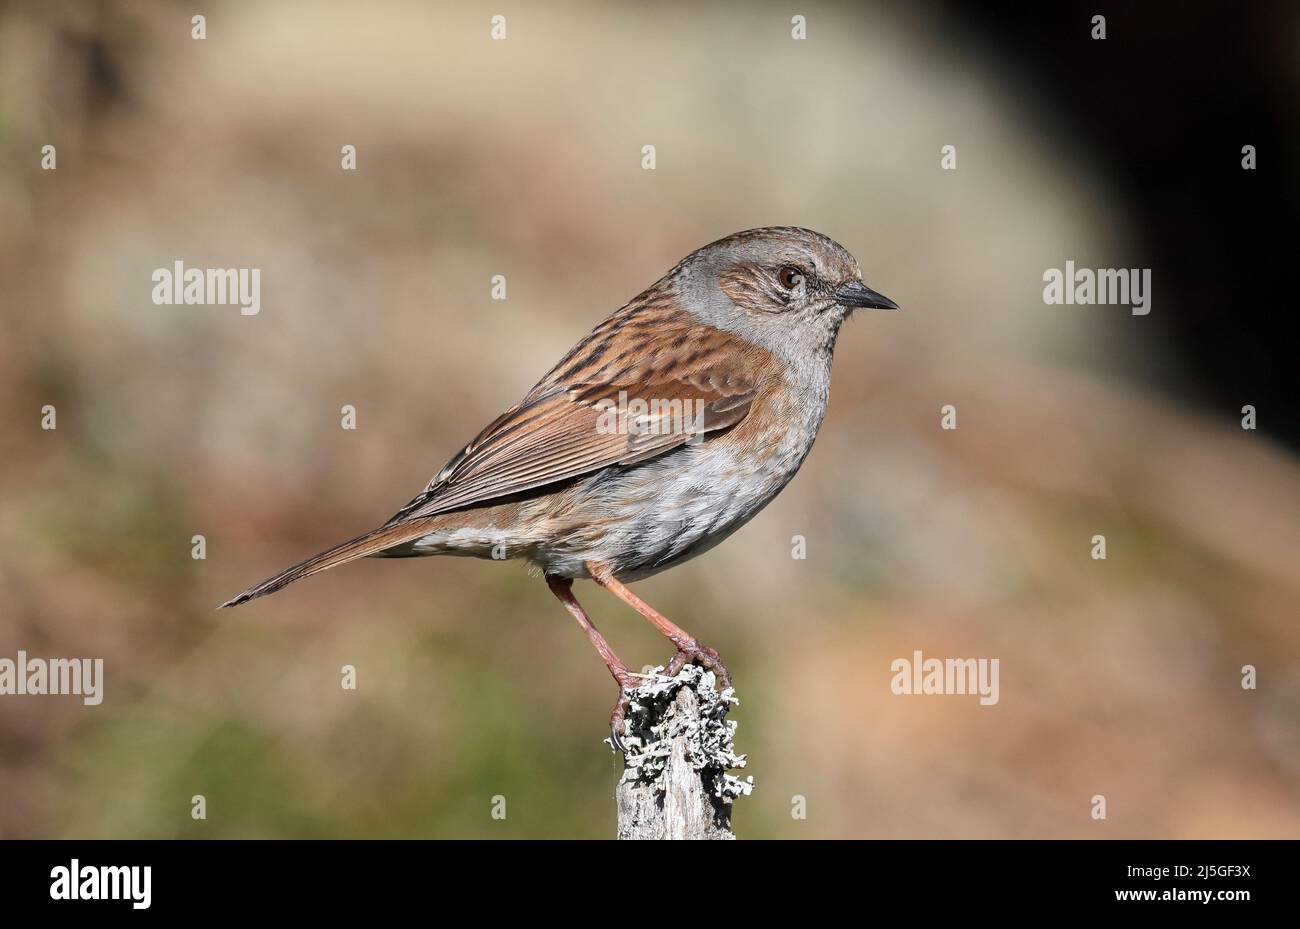 Dunnock standing on perch, clean background Stock Photo